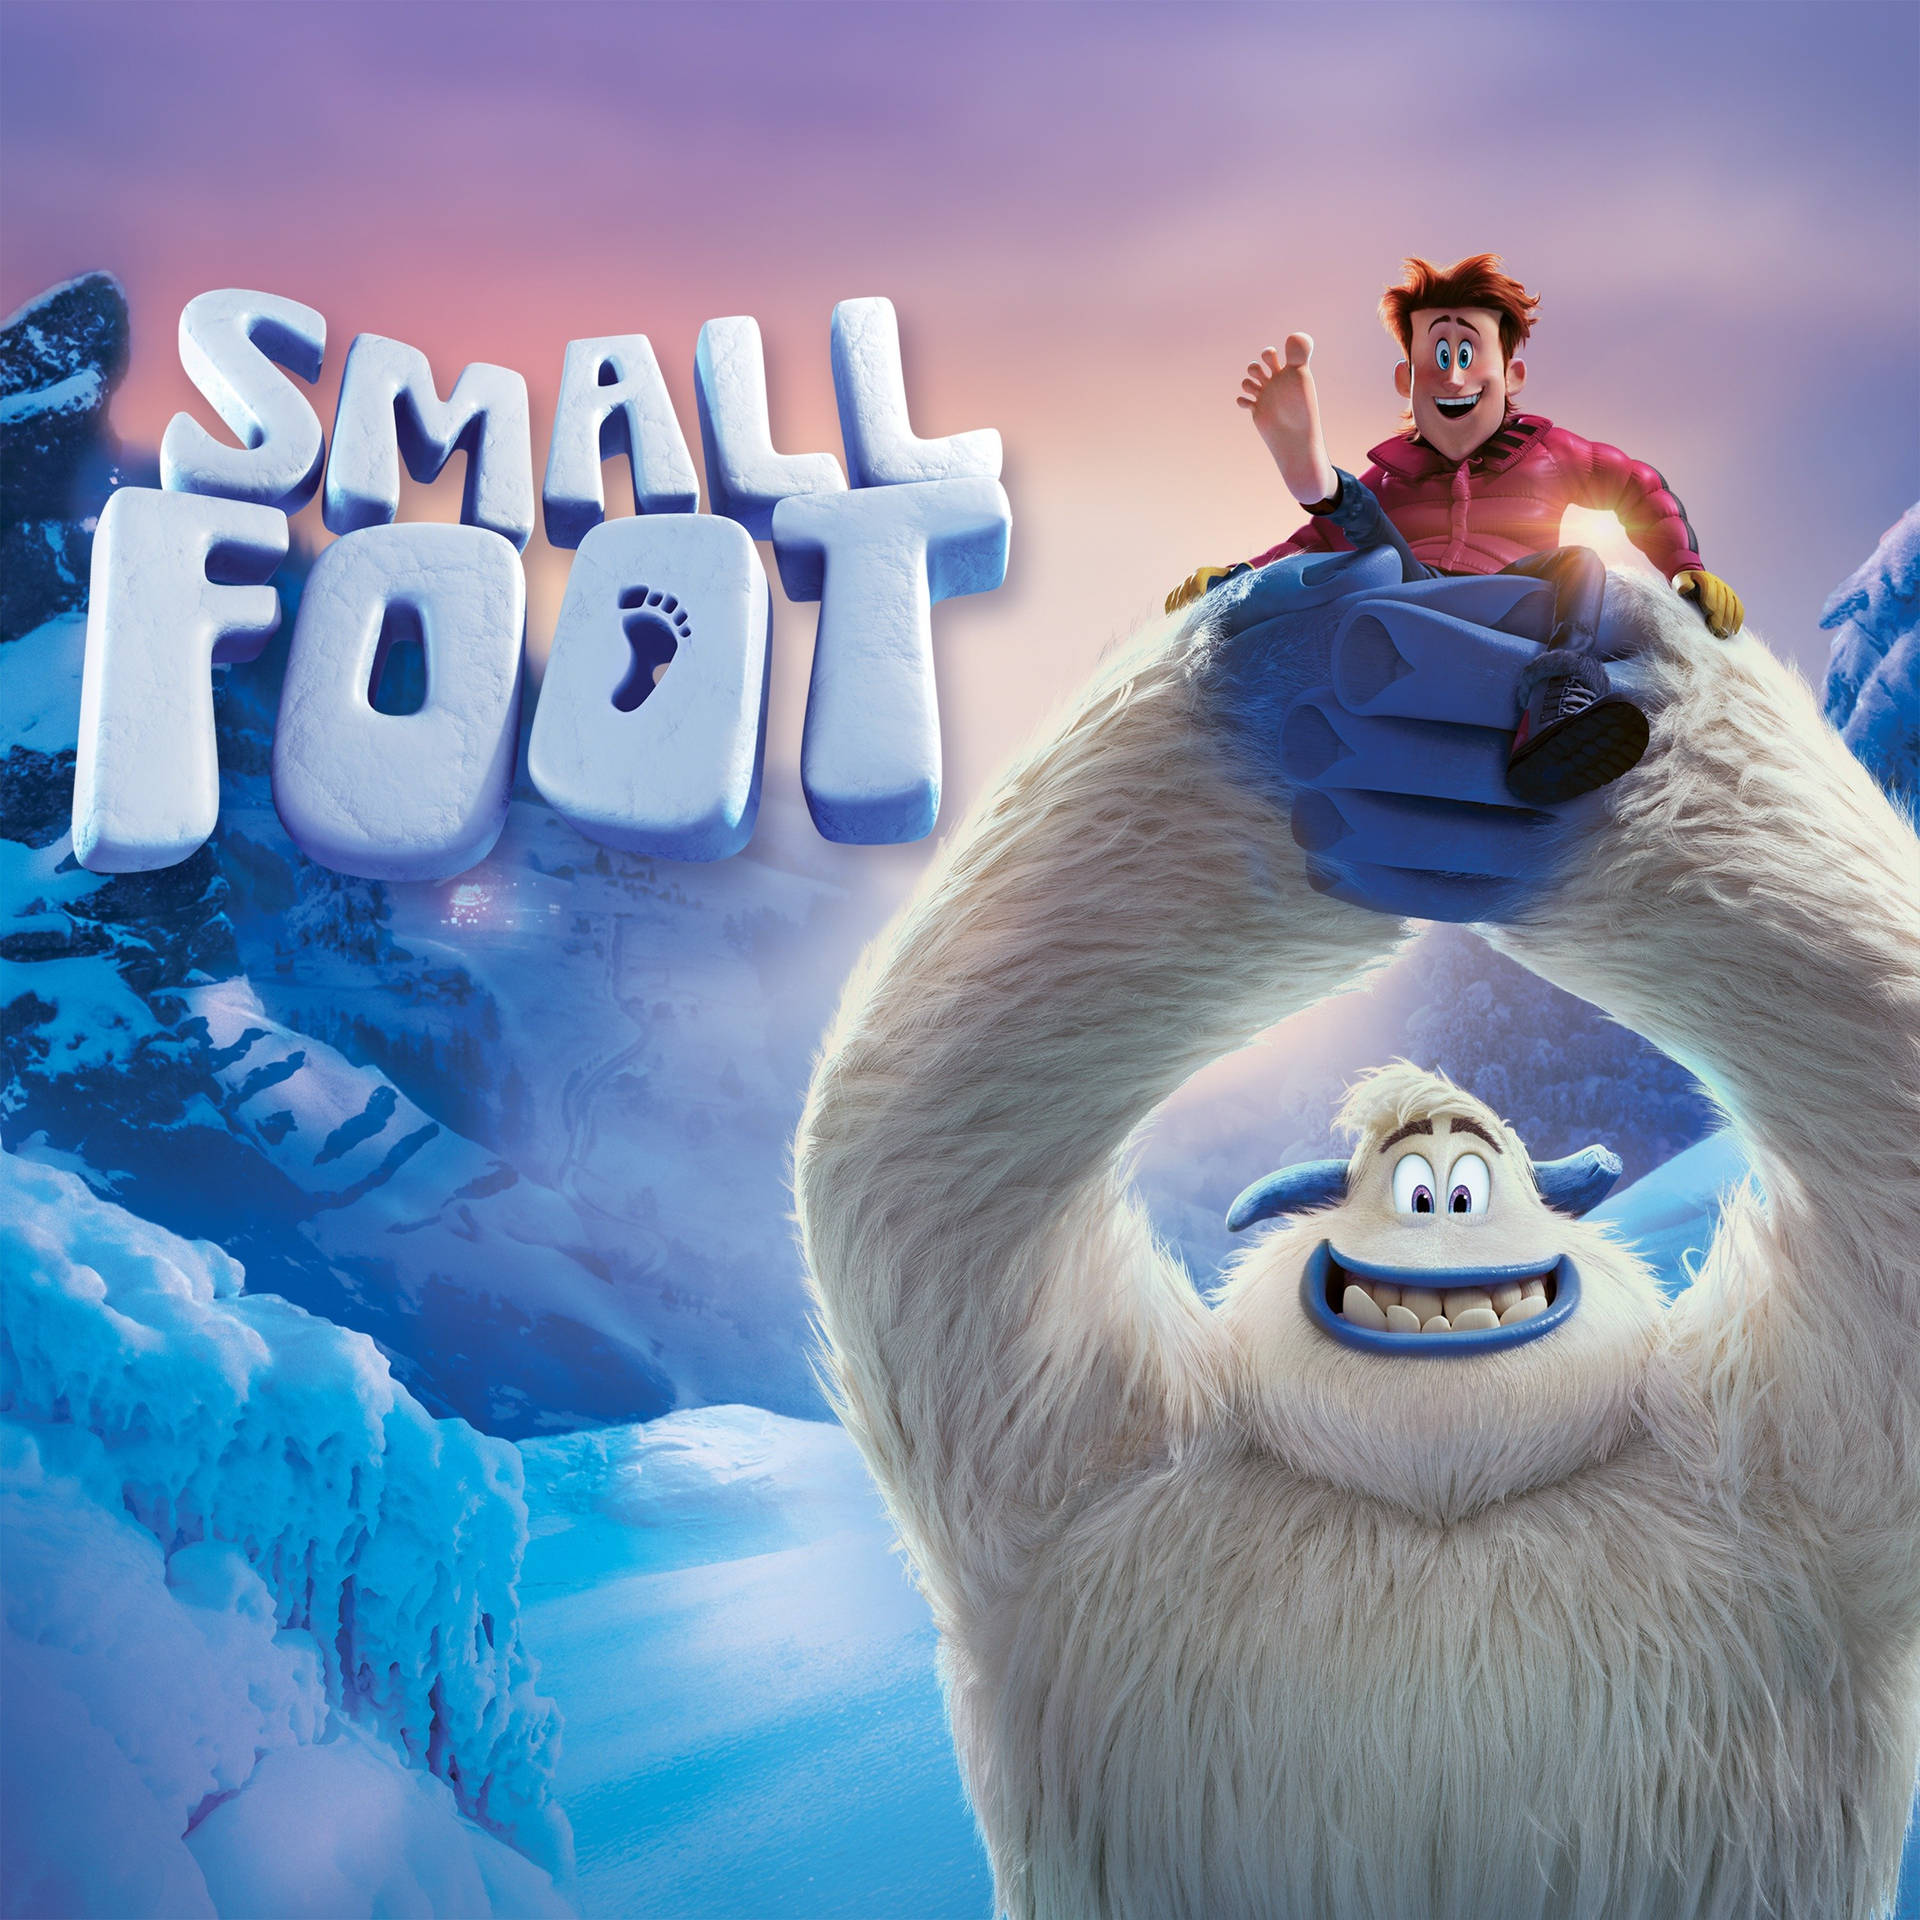 Smallfoot Official Movie Poster Background